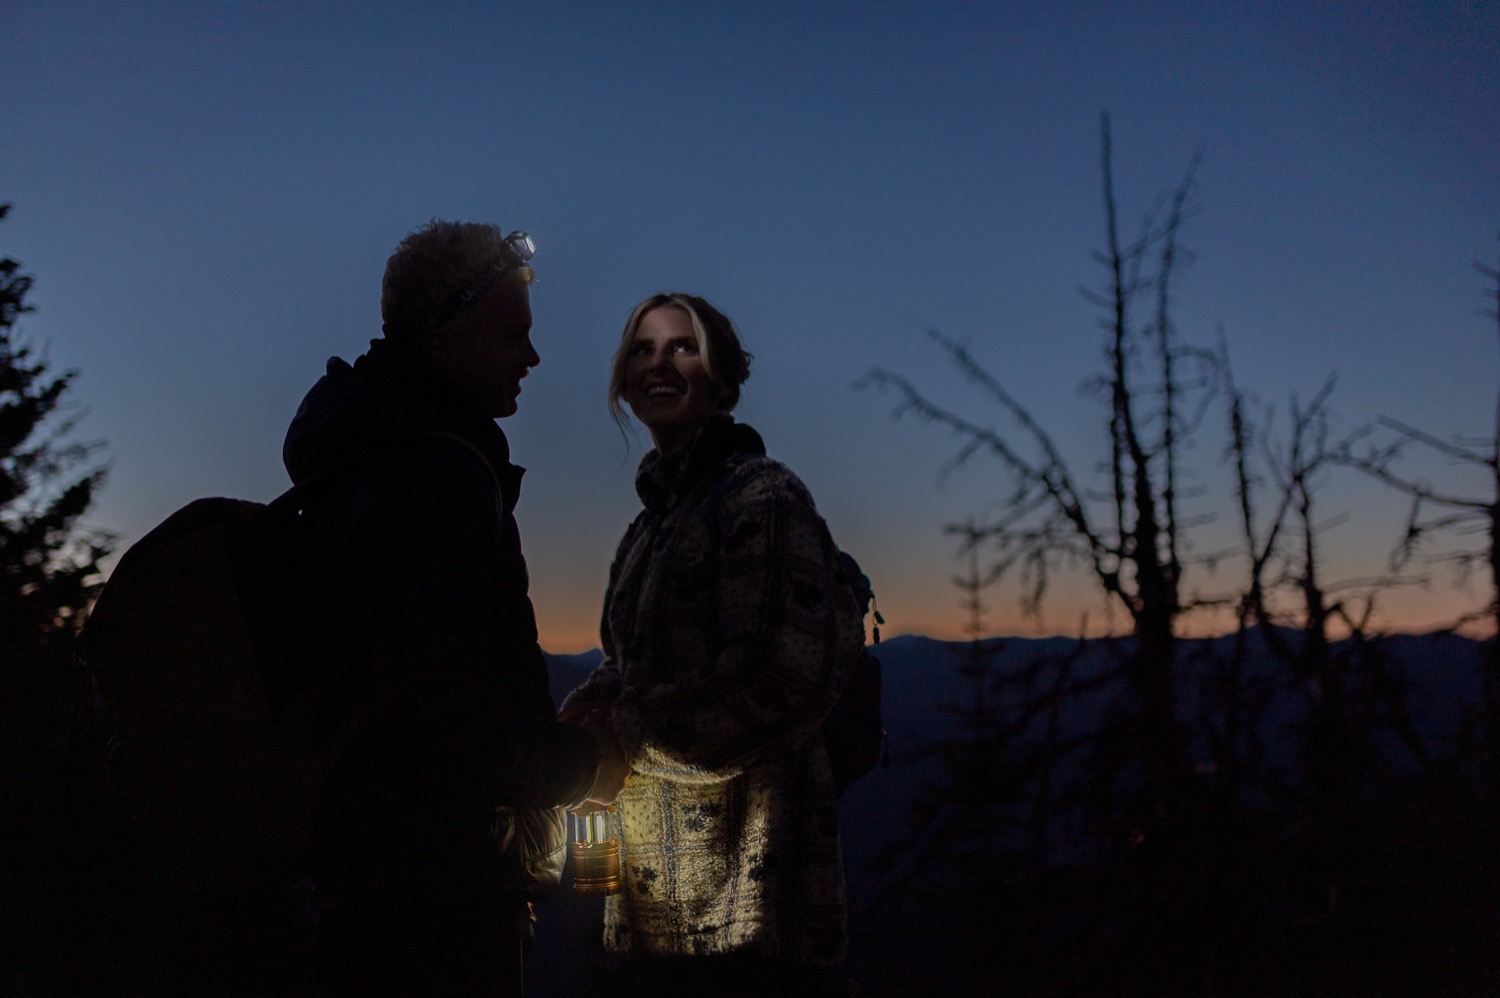 couple meeting before sunrise by headlamp light  at the top of the mountain before a hiking elopement styled shoot in Alberta Canada